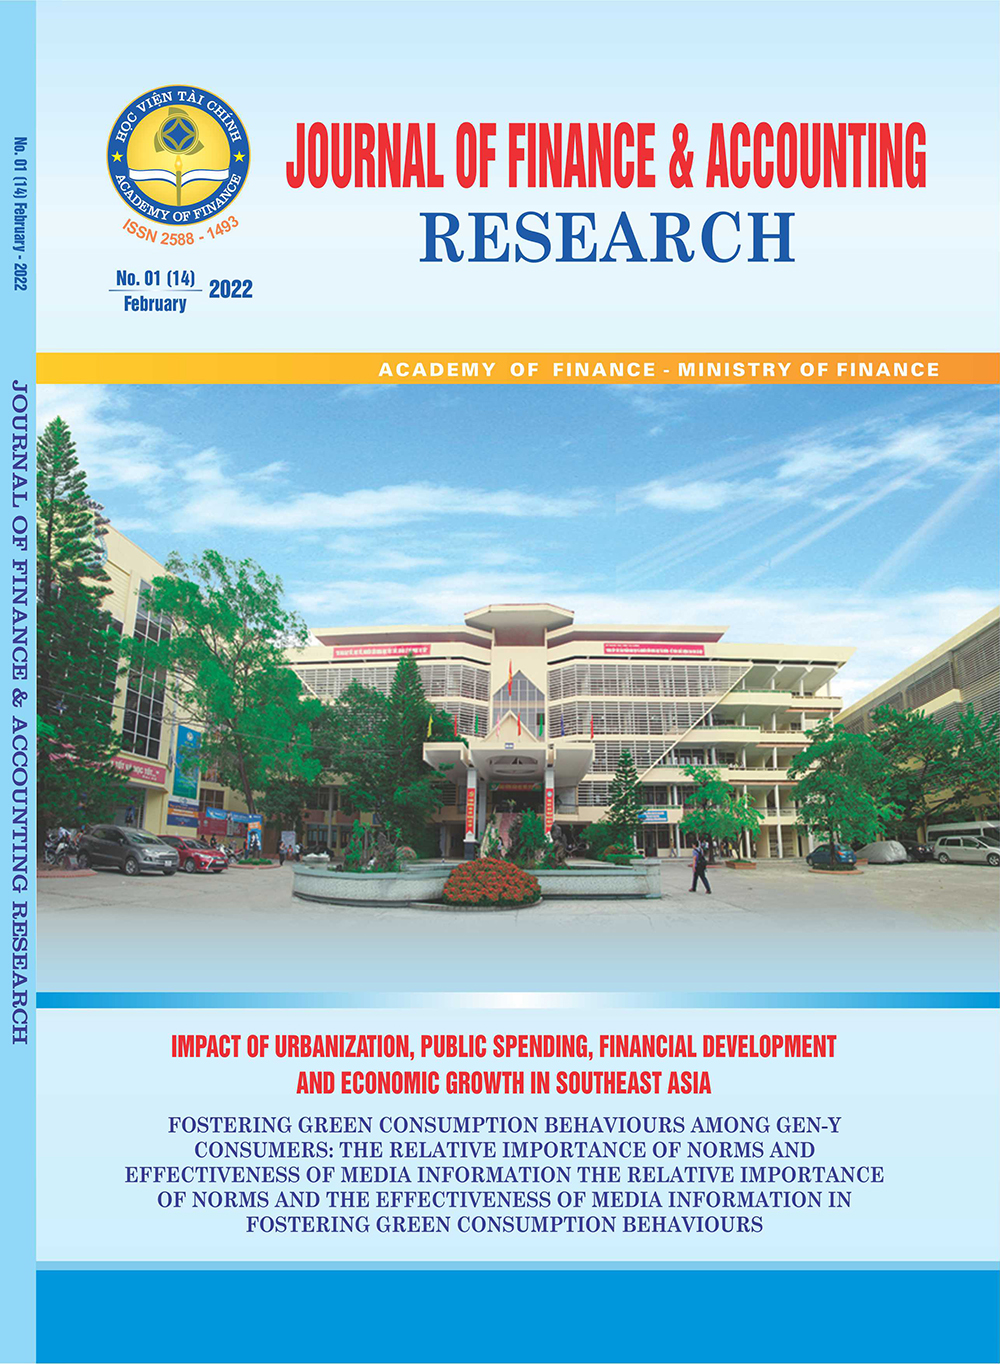 Journal of Finance and Accounting research (1 (14) 2022)